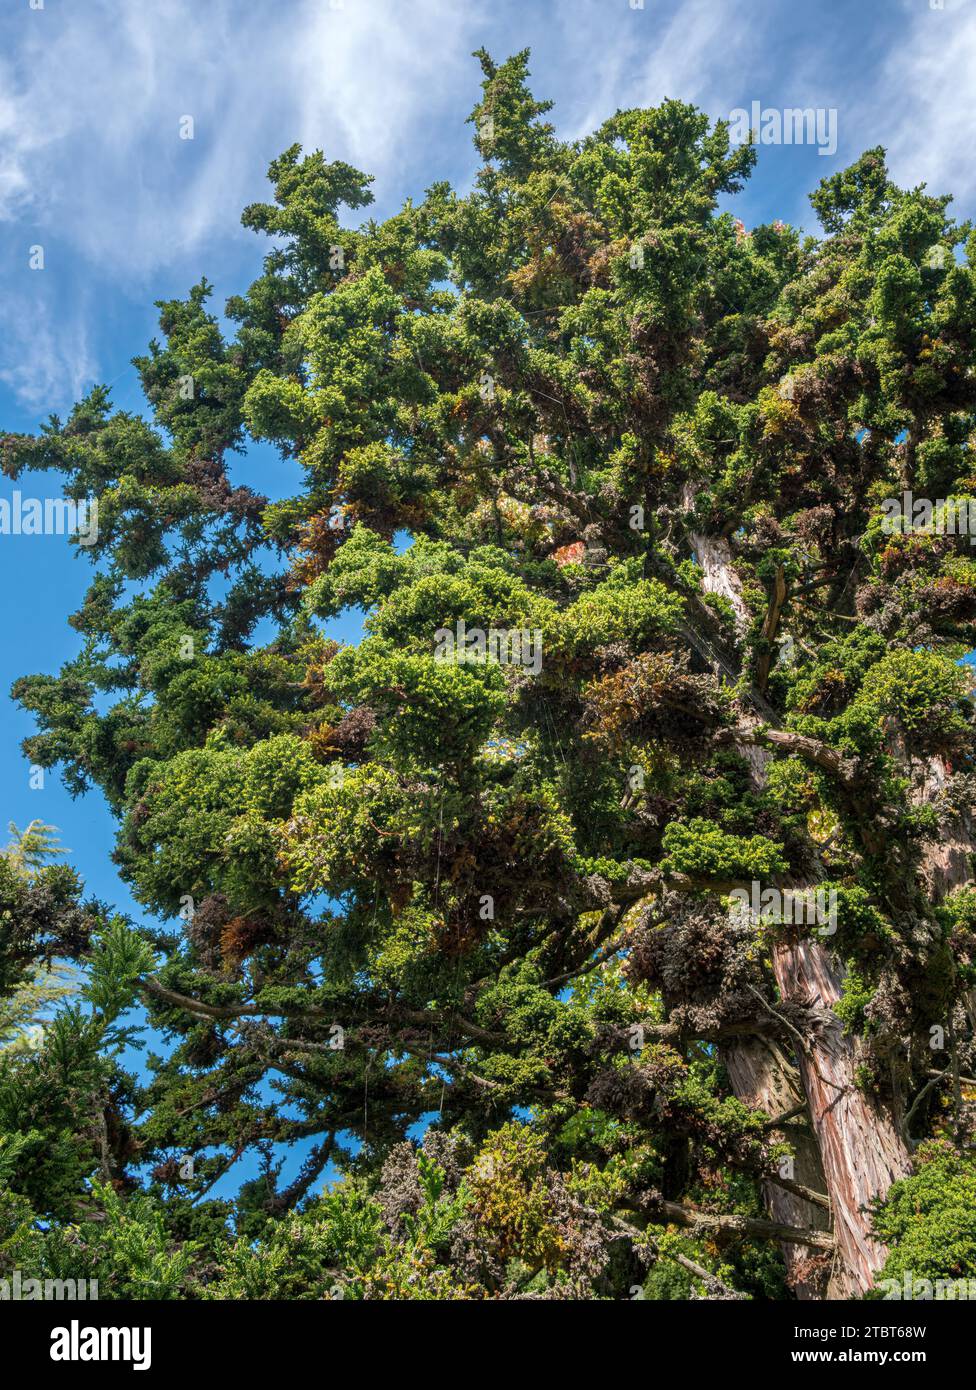 Japanese sickle fir, Cryptomeria japonica, Bandai Sugi, family Taxodiaceae, in the park on the island of Mainau, Lake Constance, Baden-Württemberg, Germany, Europe Stock Photo